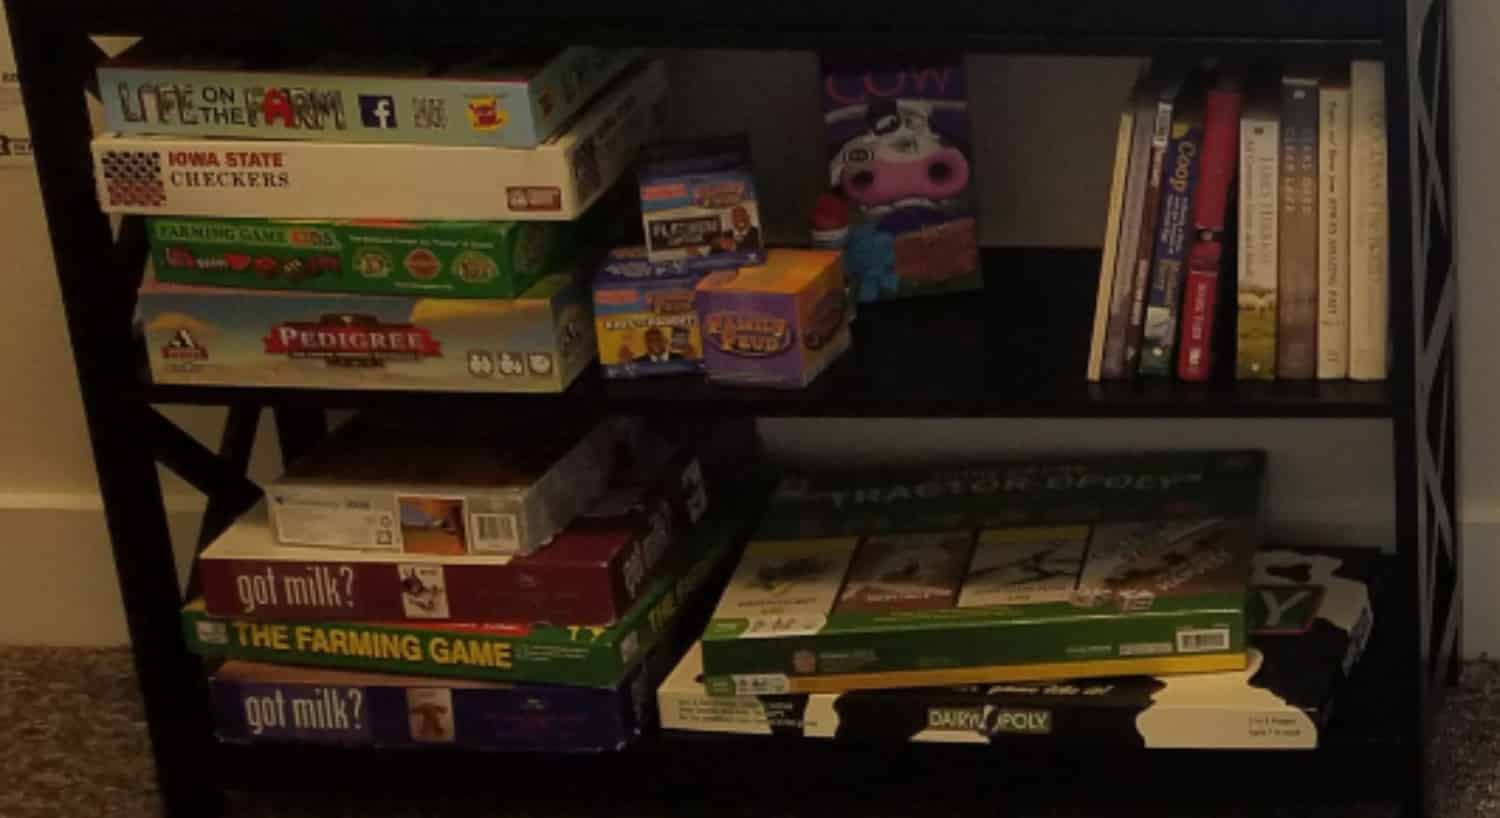 shelves with games, puzzles, DVD's, and books